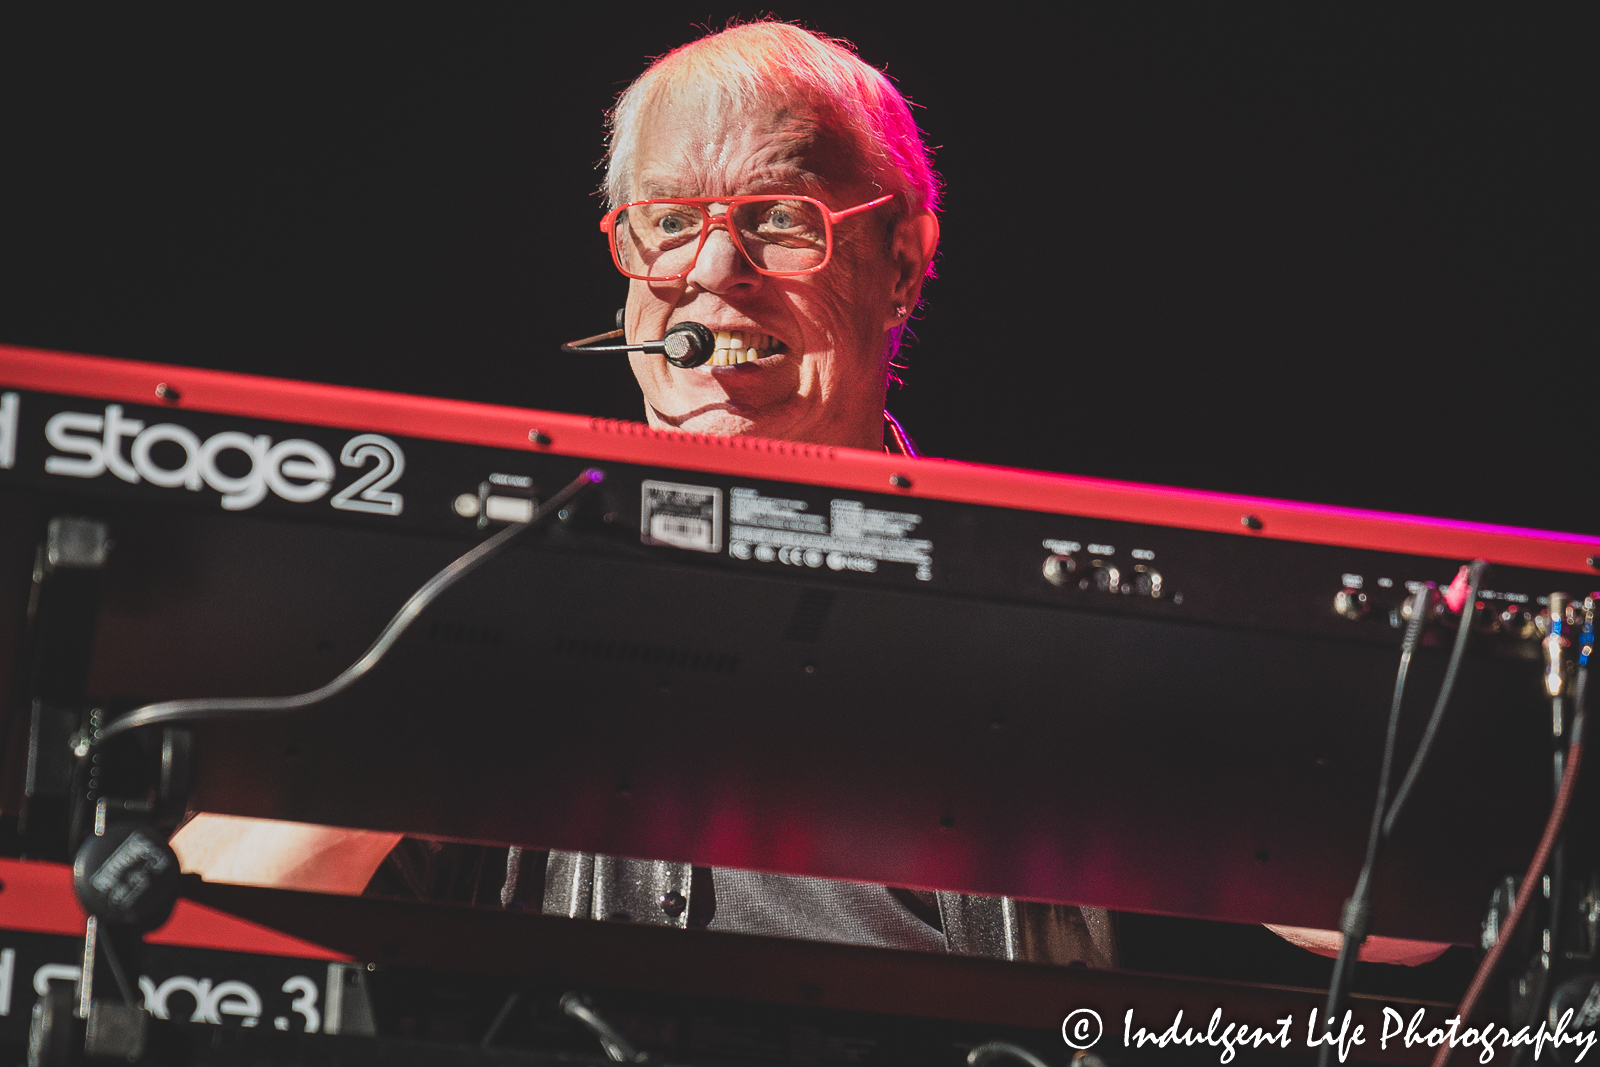 Shooting Star keyboard player Dennis Laffoon performing live in at Star Pavilion inside of Ameristar Casino in Kansas City, MO on April 9, 2022.